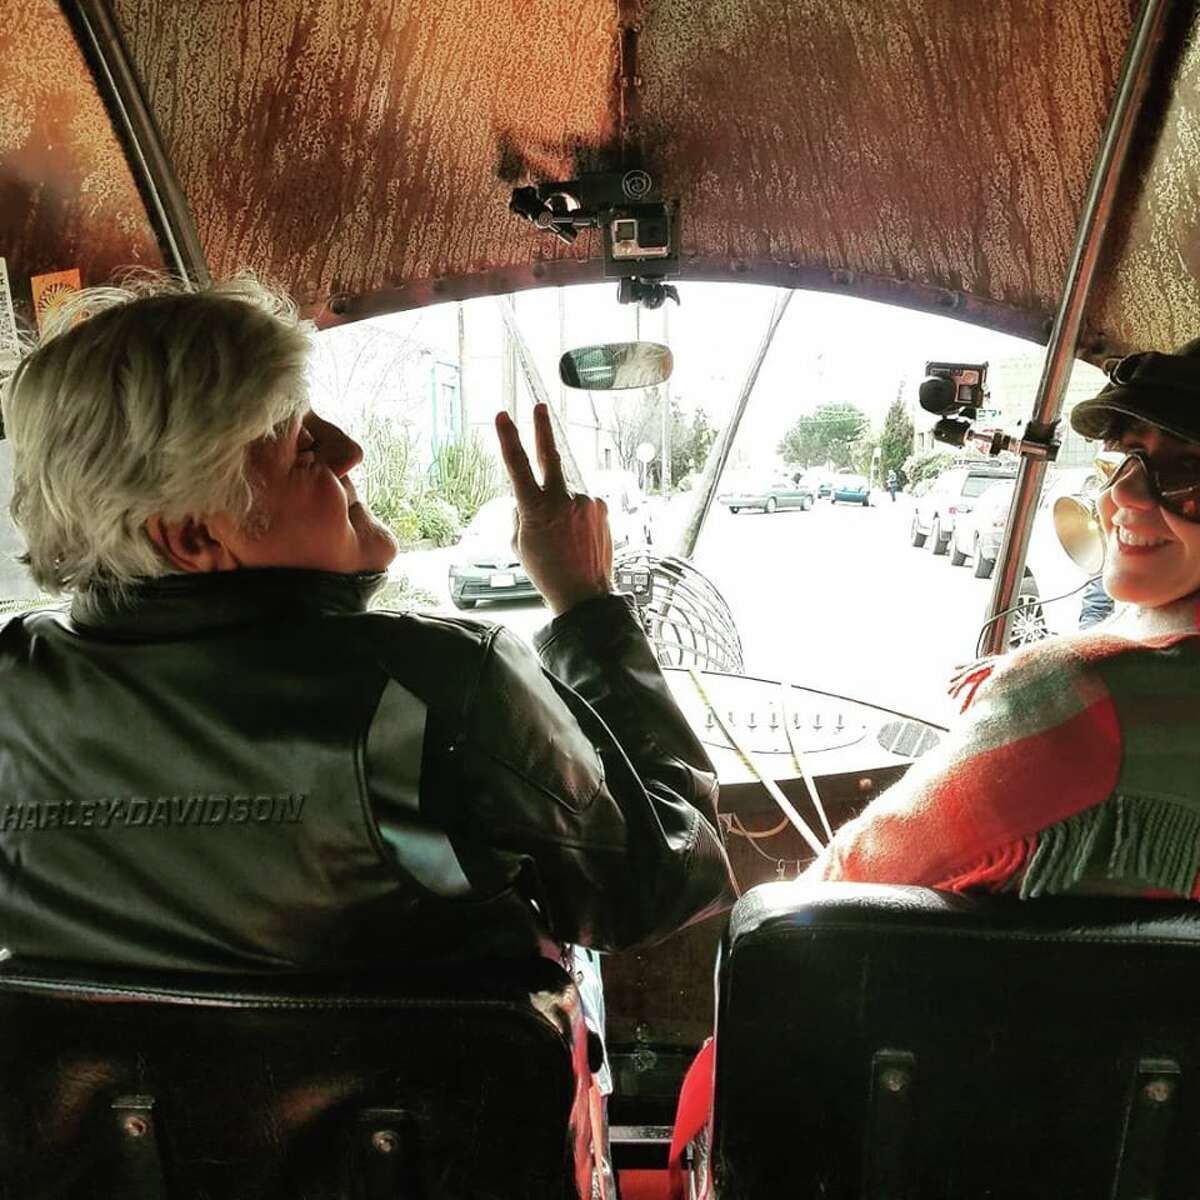 Jay Leno took to Oakland to visit Form & Reform, home to the snail art car, Golden Mean.